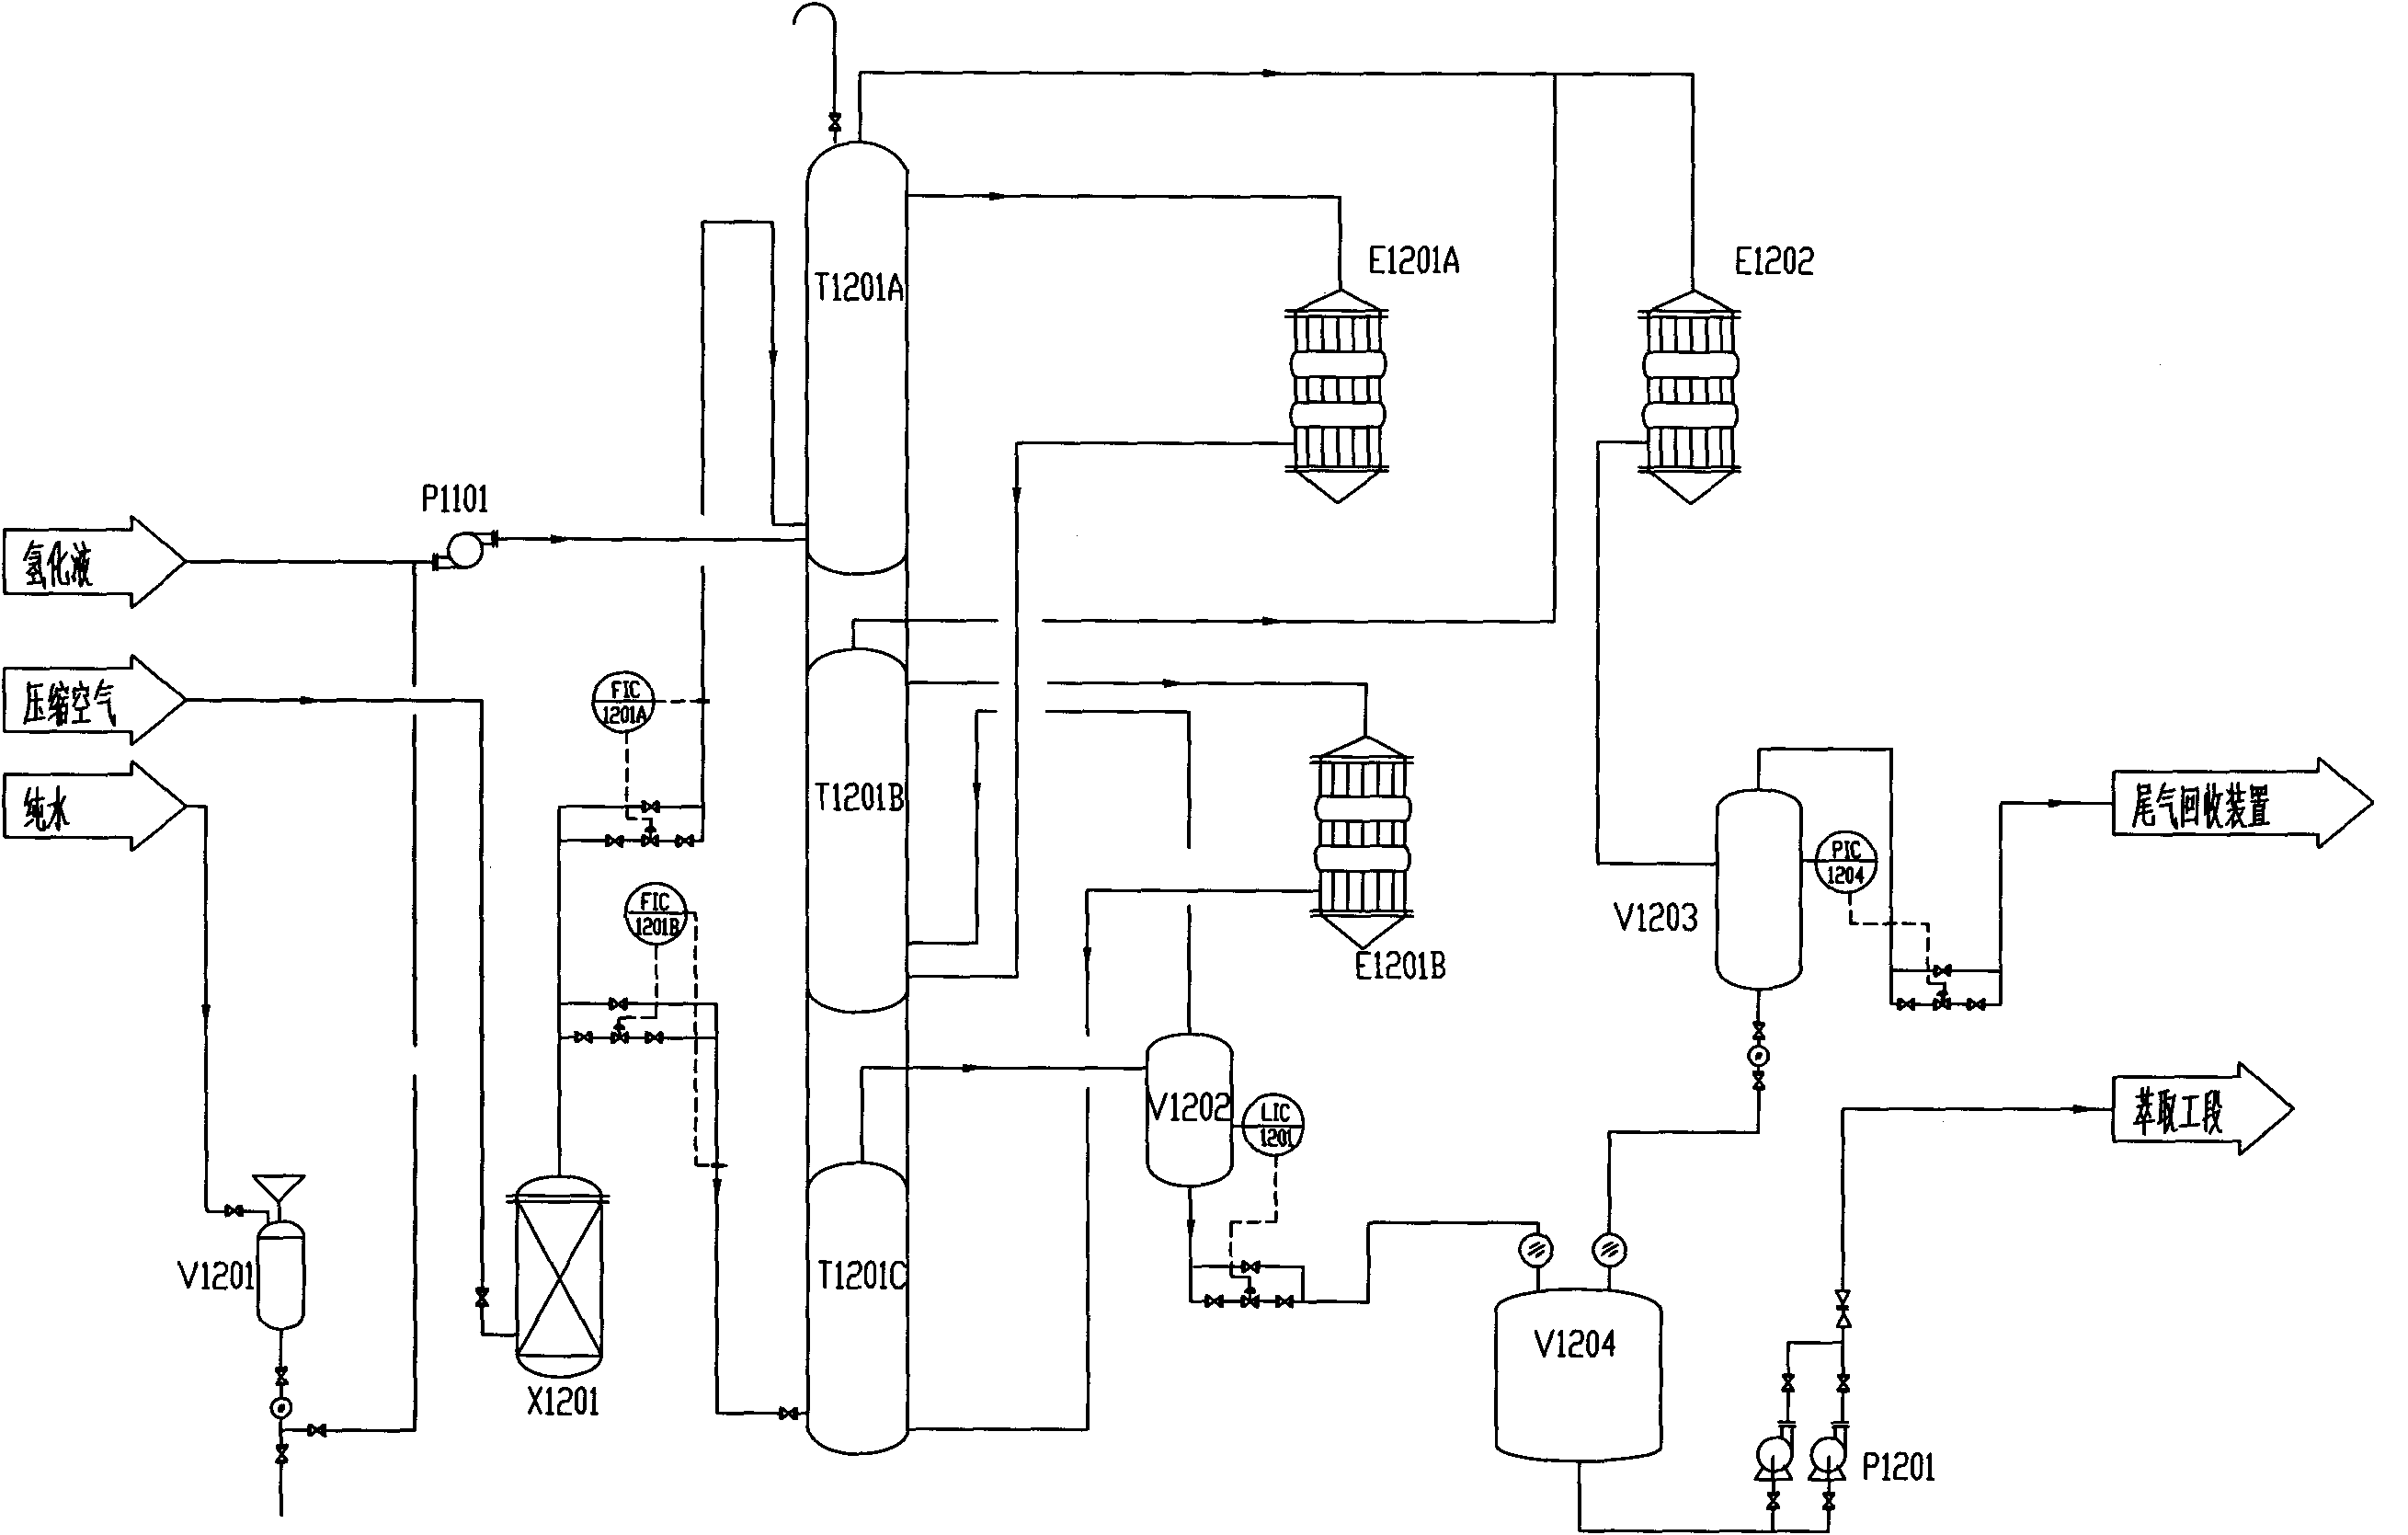 Oxidation system for producing hydrogen peroxide